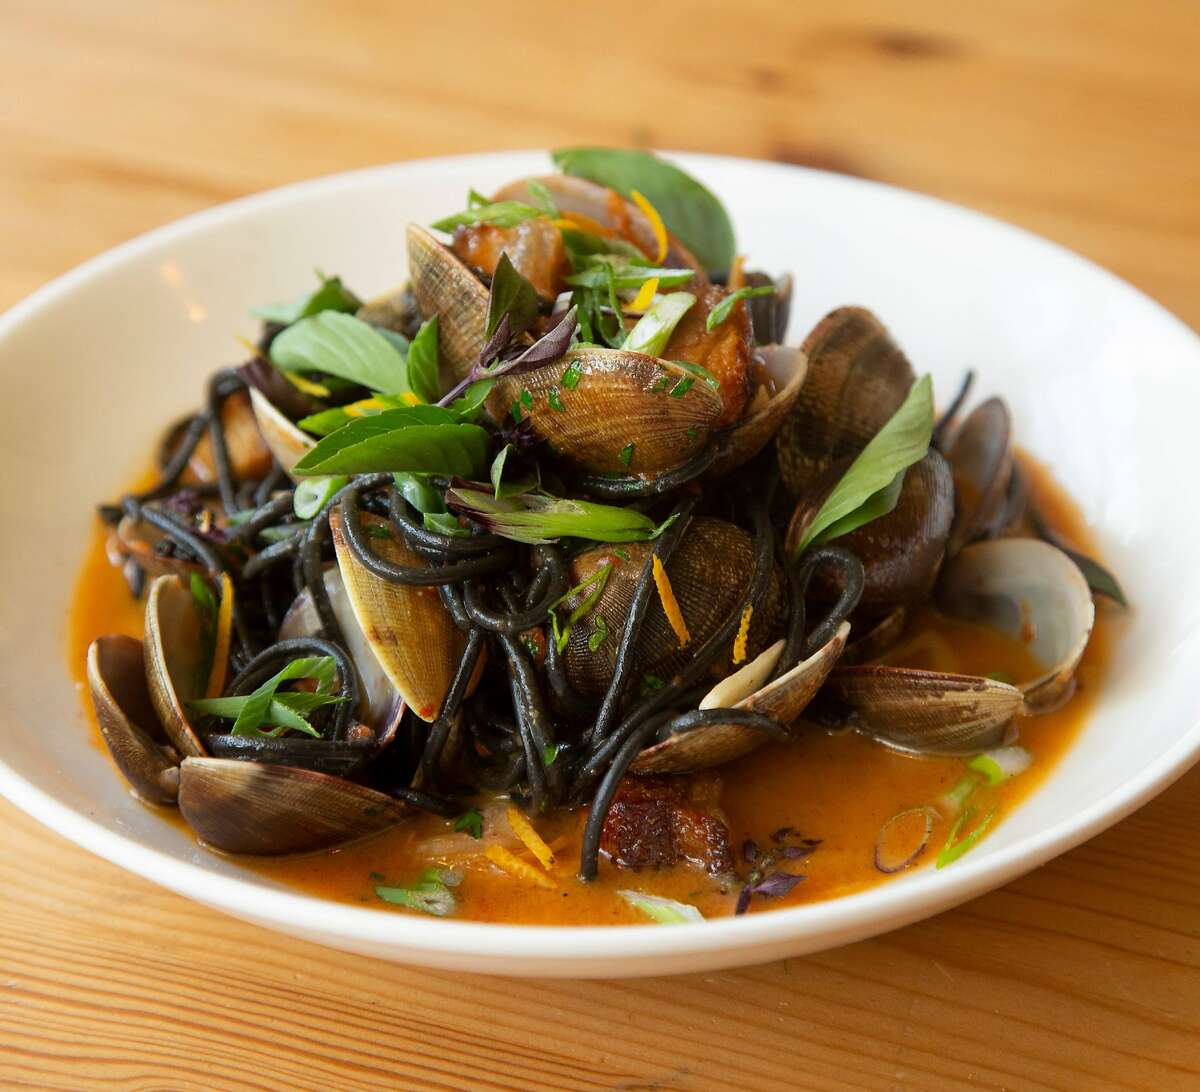 Squid ink spaghetti with manilla clams, pork belly and tanuki cider fermented chili miso broth is one of the menu items offered at Home restaurant on Wednesday, 8/8, 2018 in Soquel, California. Home is one of several Monterey Bay area restaurants recommended by Soerke Peters who is president of the Monterey Bay chapter of American Culinary Federation.